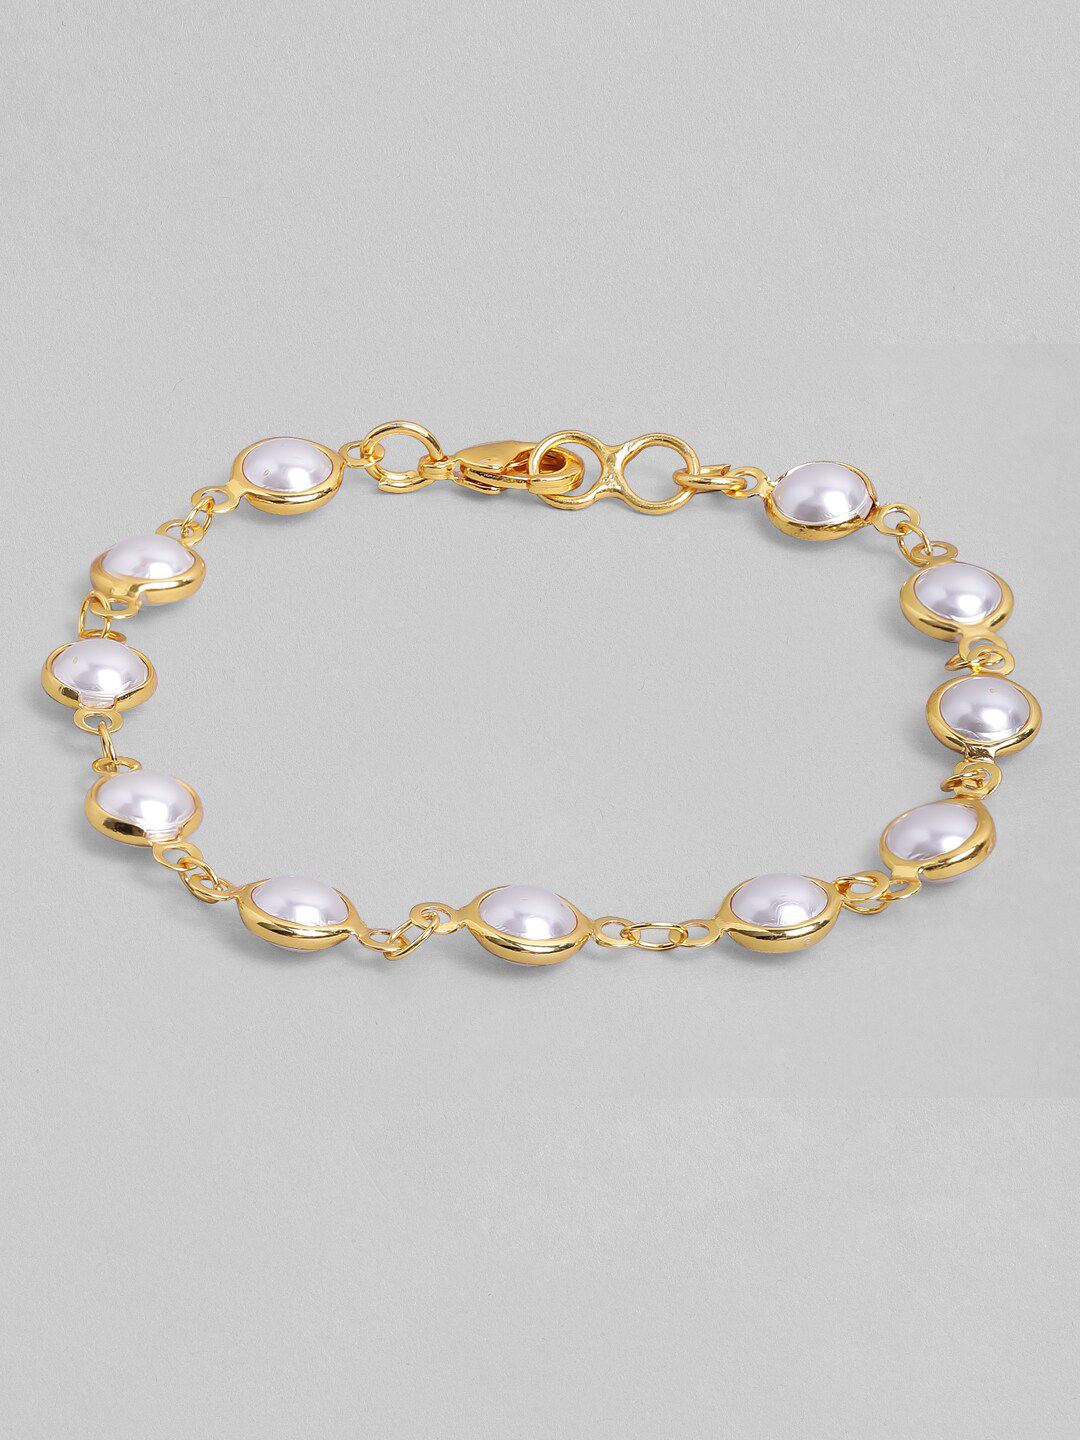 Rubans Women 24K Gold-Toned Handcrafted Pearl Studded Charm Bracelet Price in India